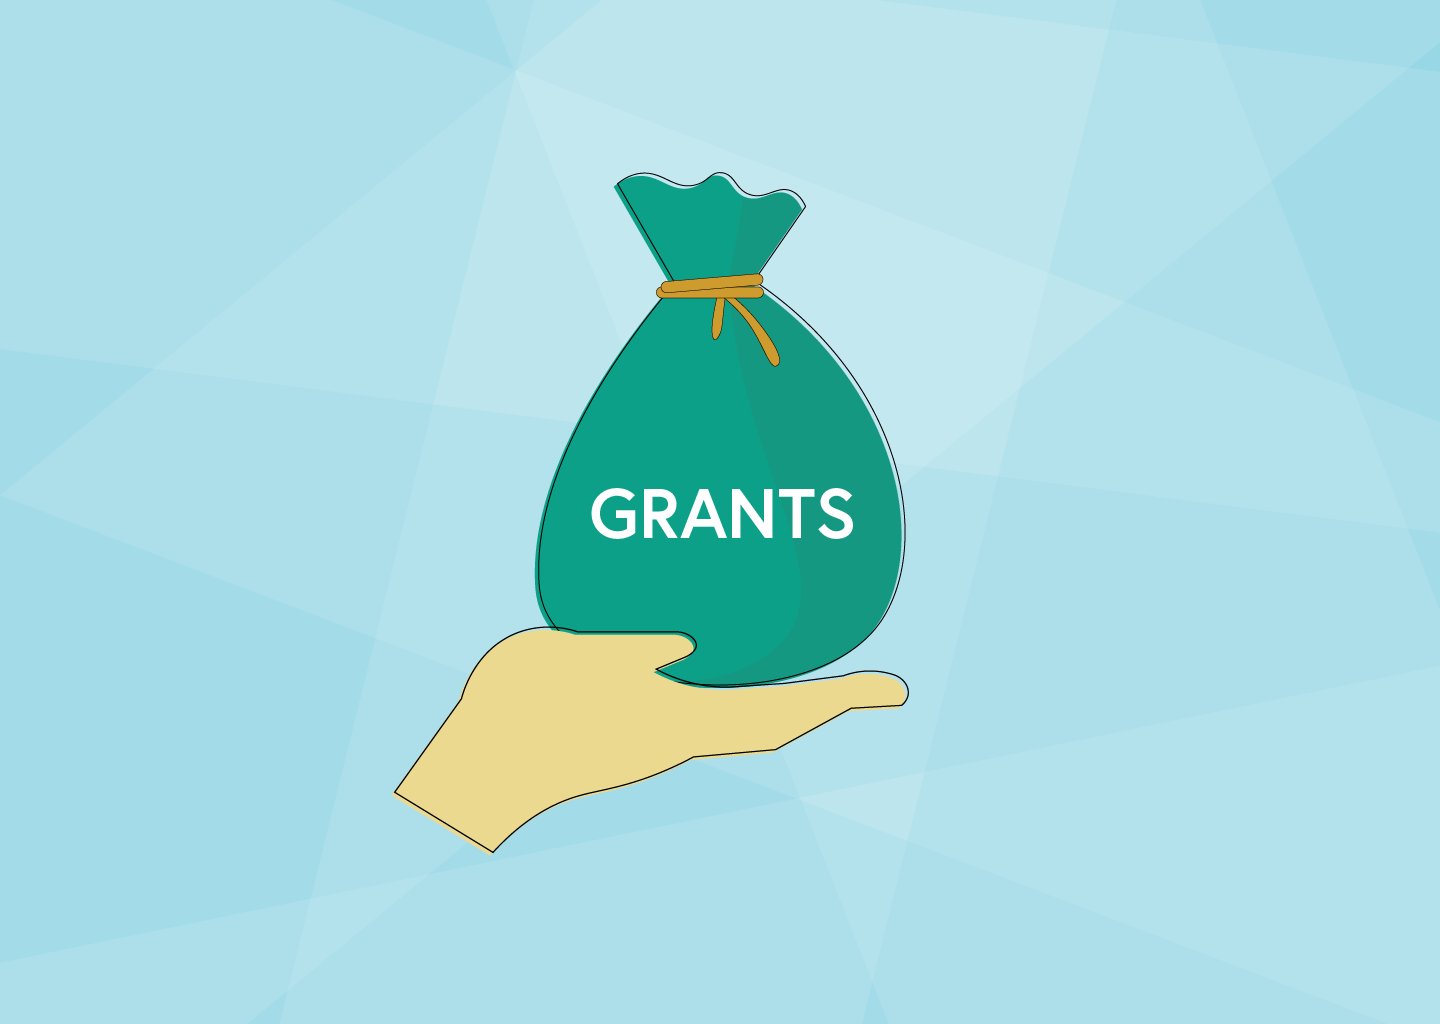 How to Start Grant Writing (+ Templates)